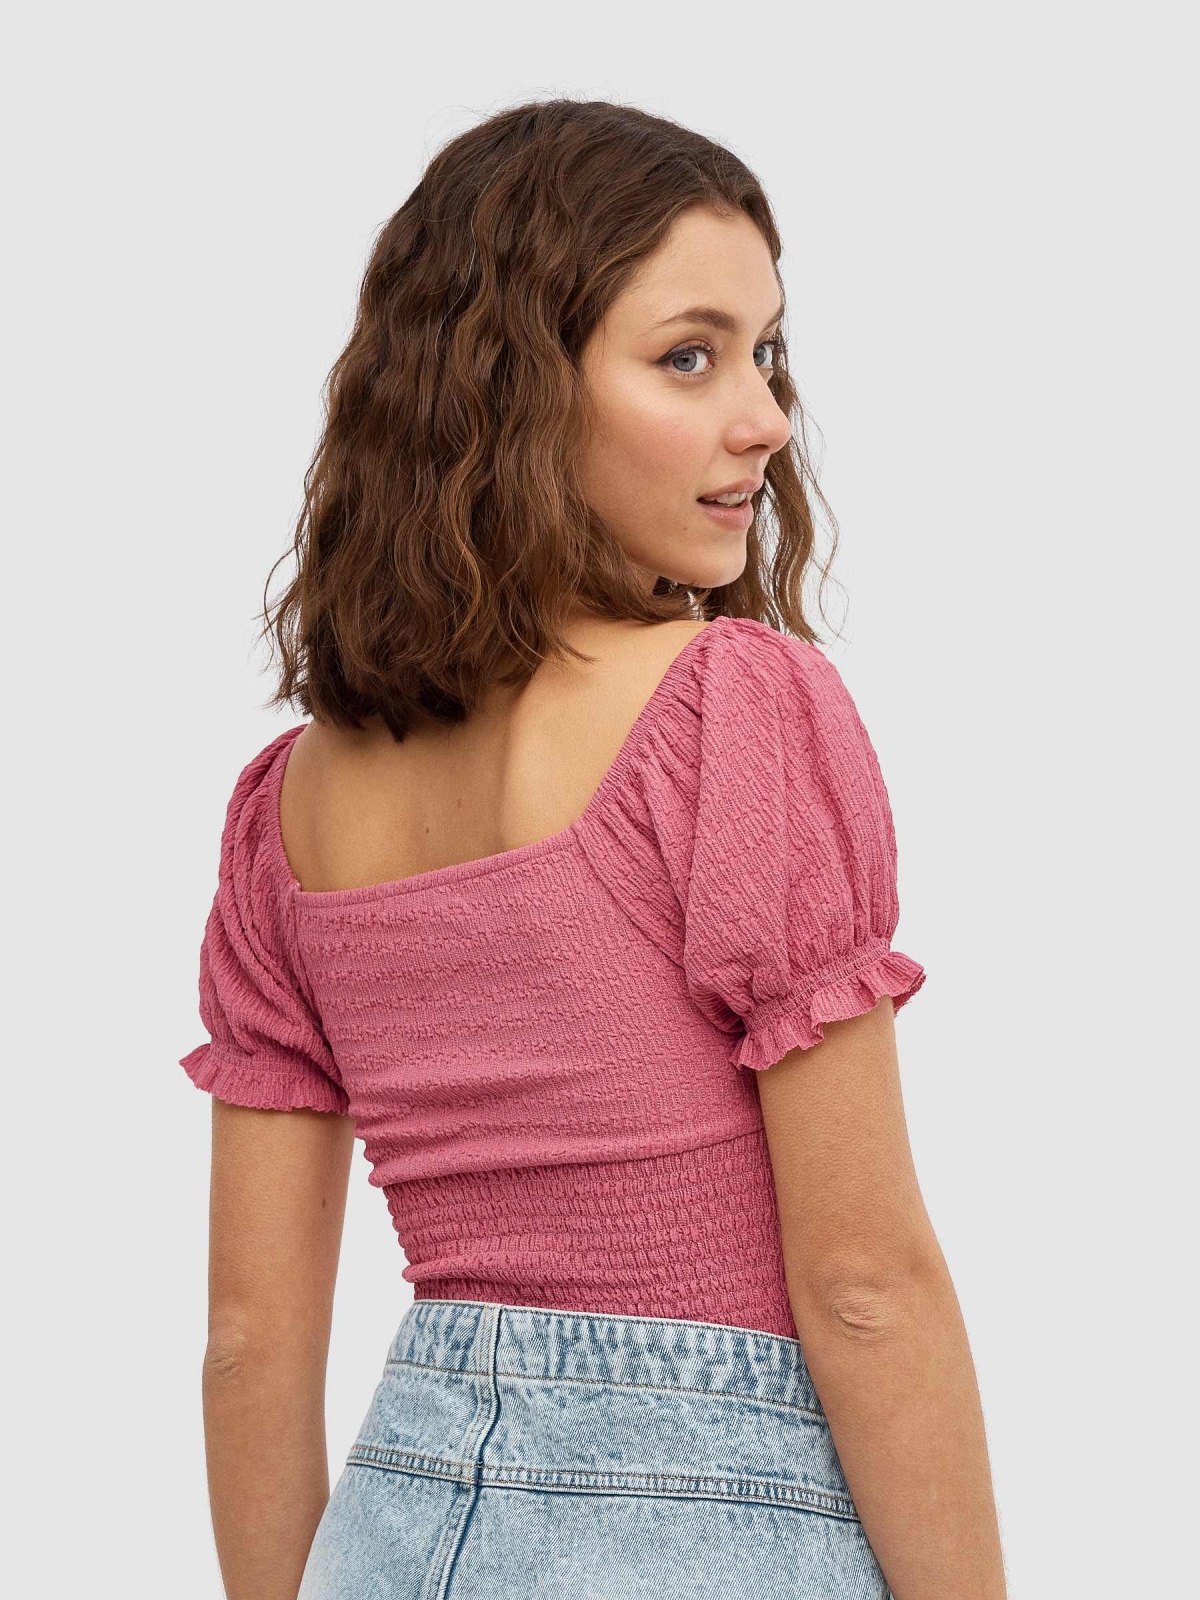 Ruffled Top with bow powdered pink middle back view